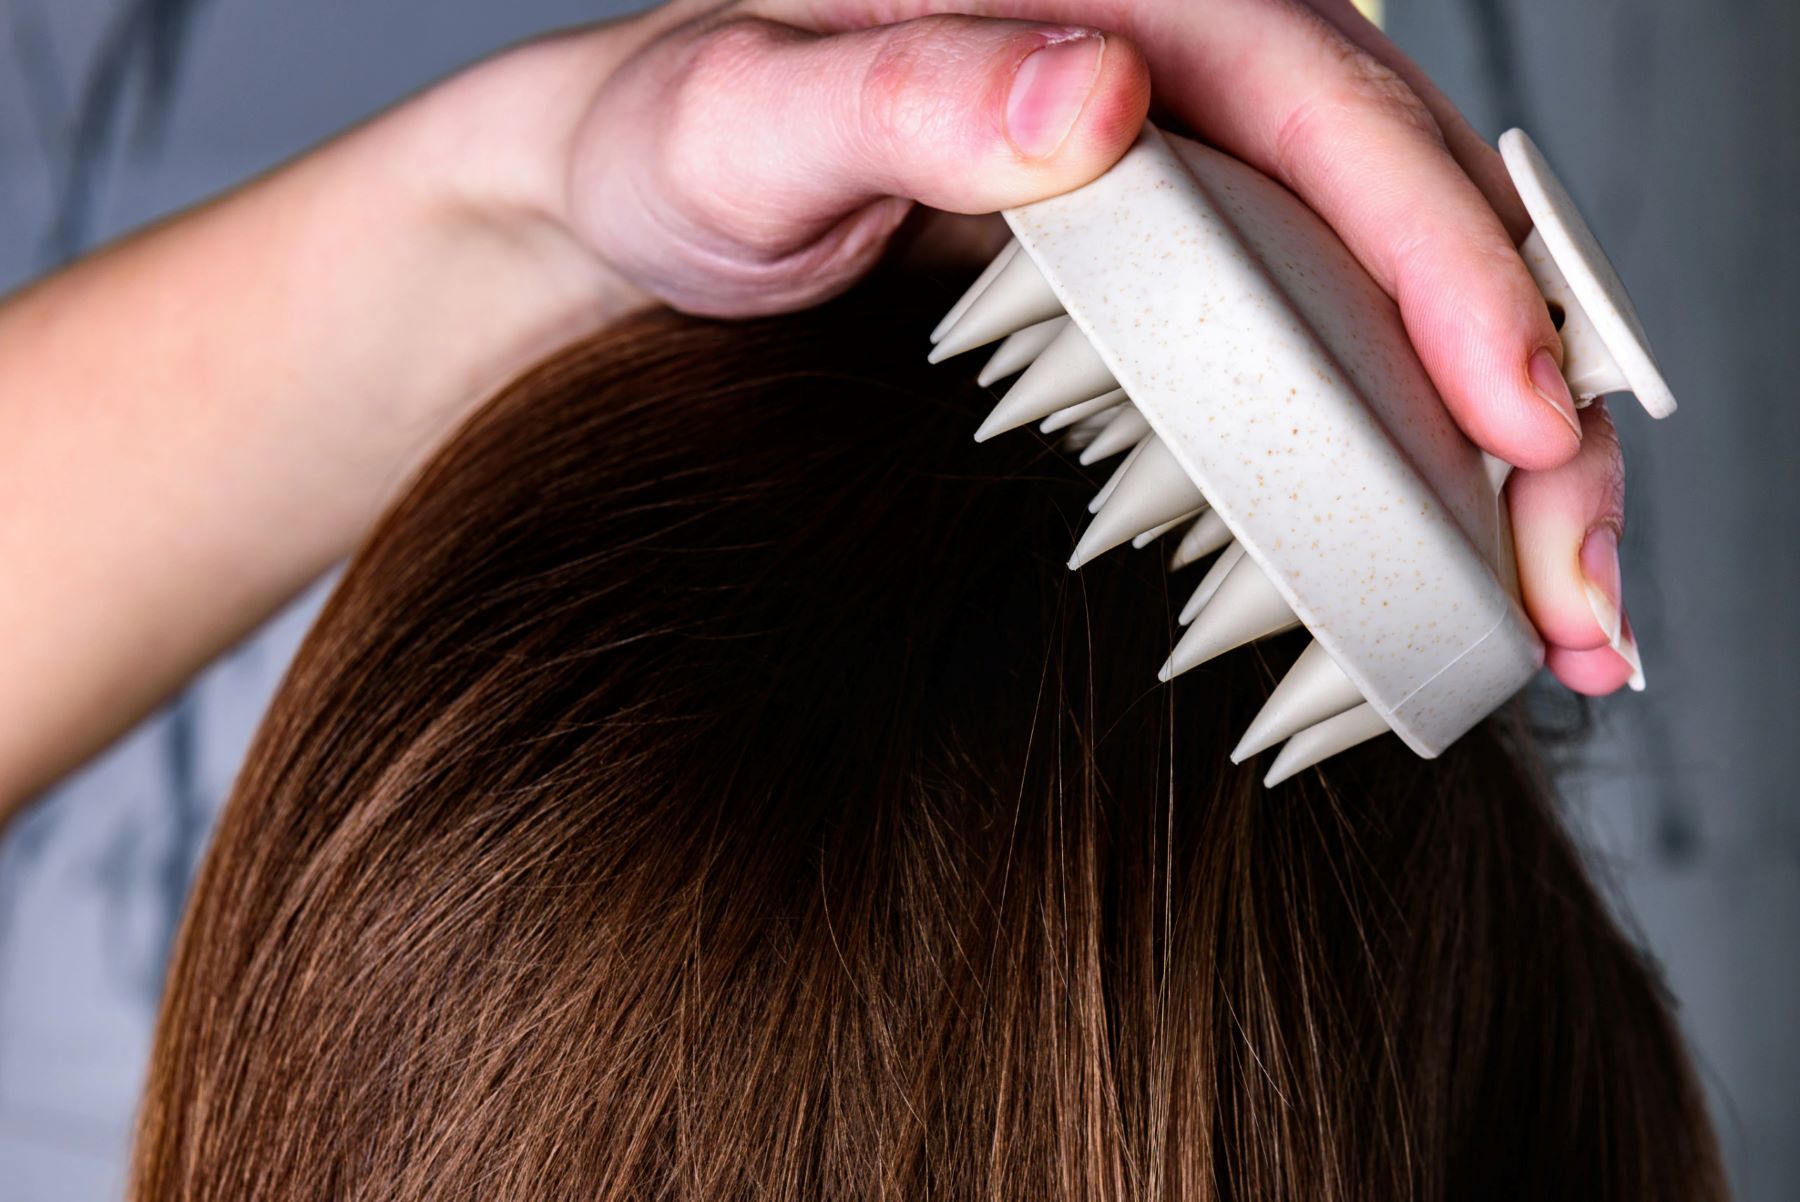 Can scalp massagers really stimulate hair growth?